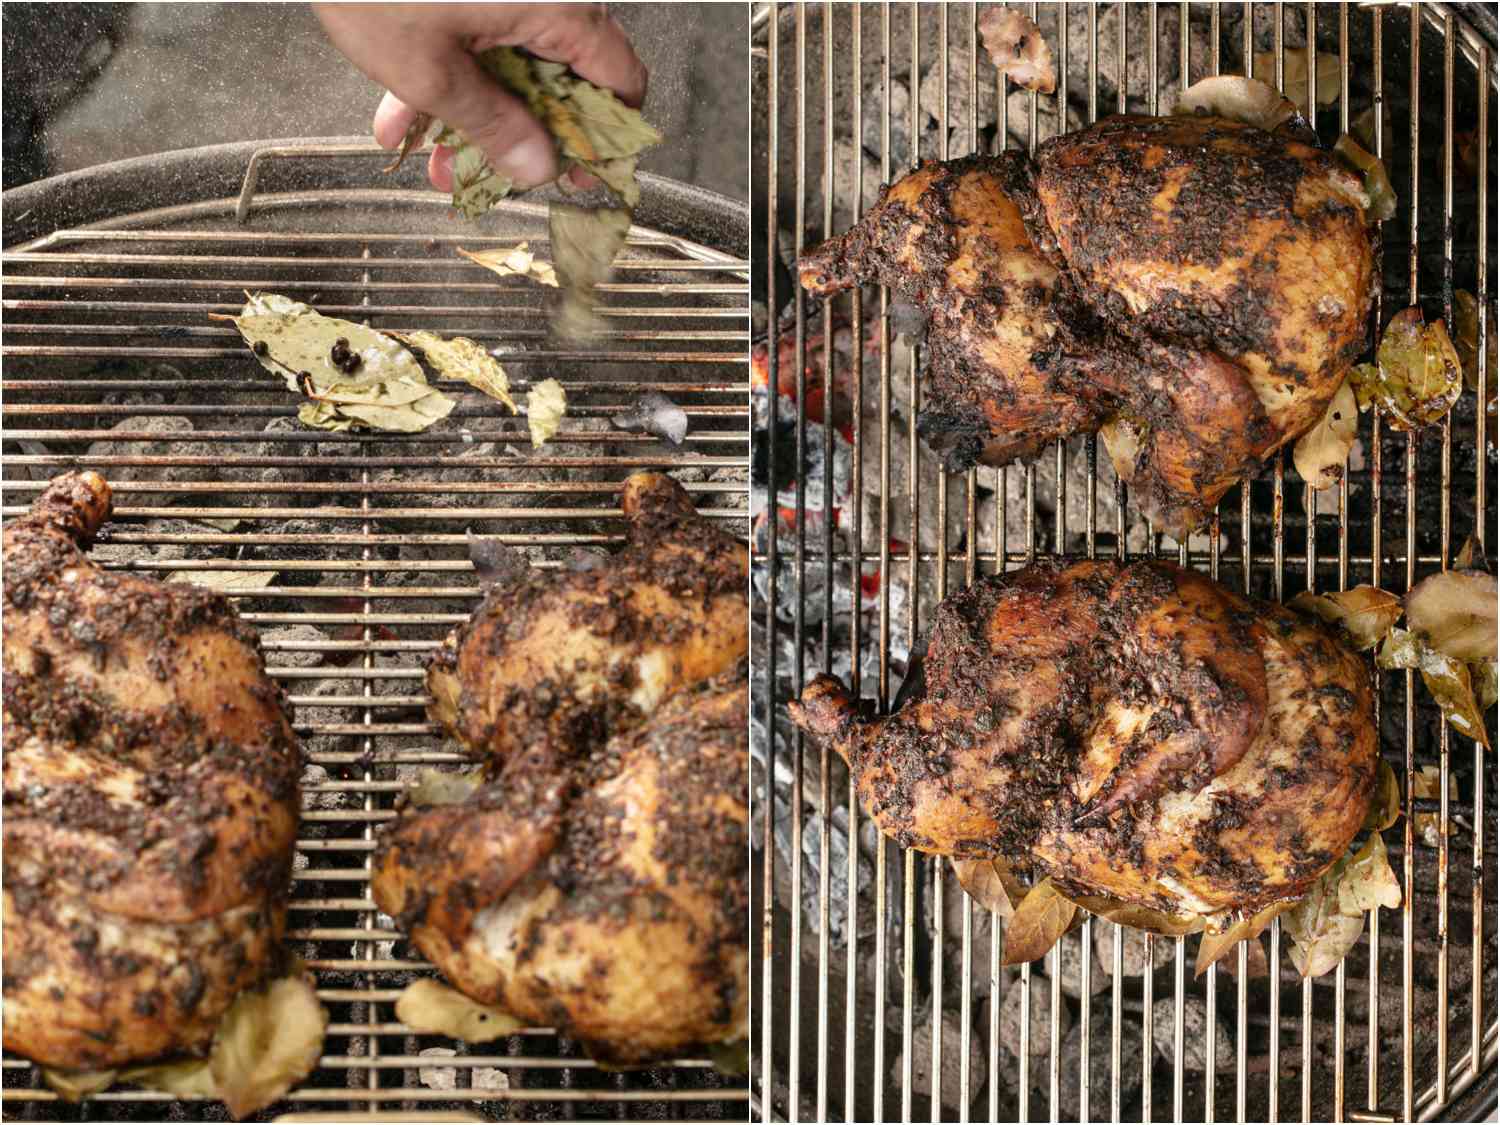 Managing the Grill while Grilling jerk chicken